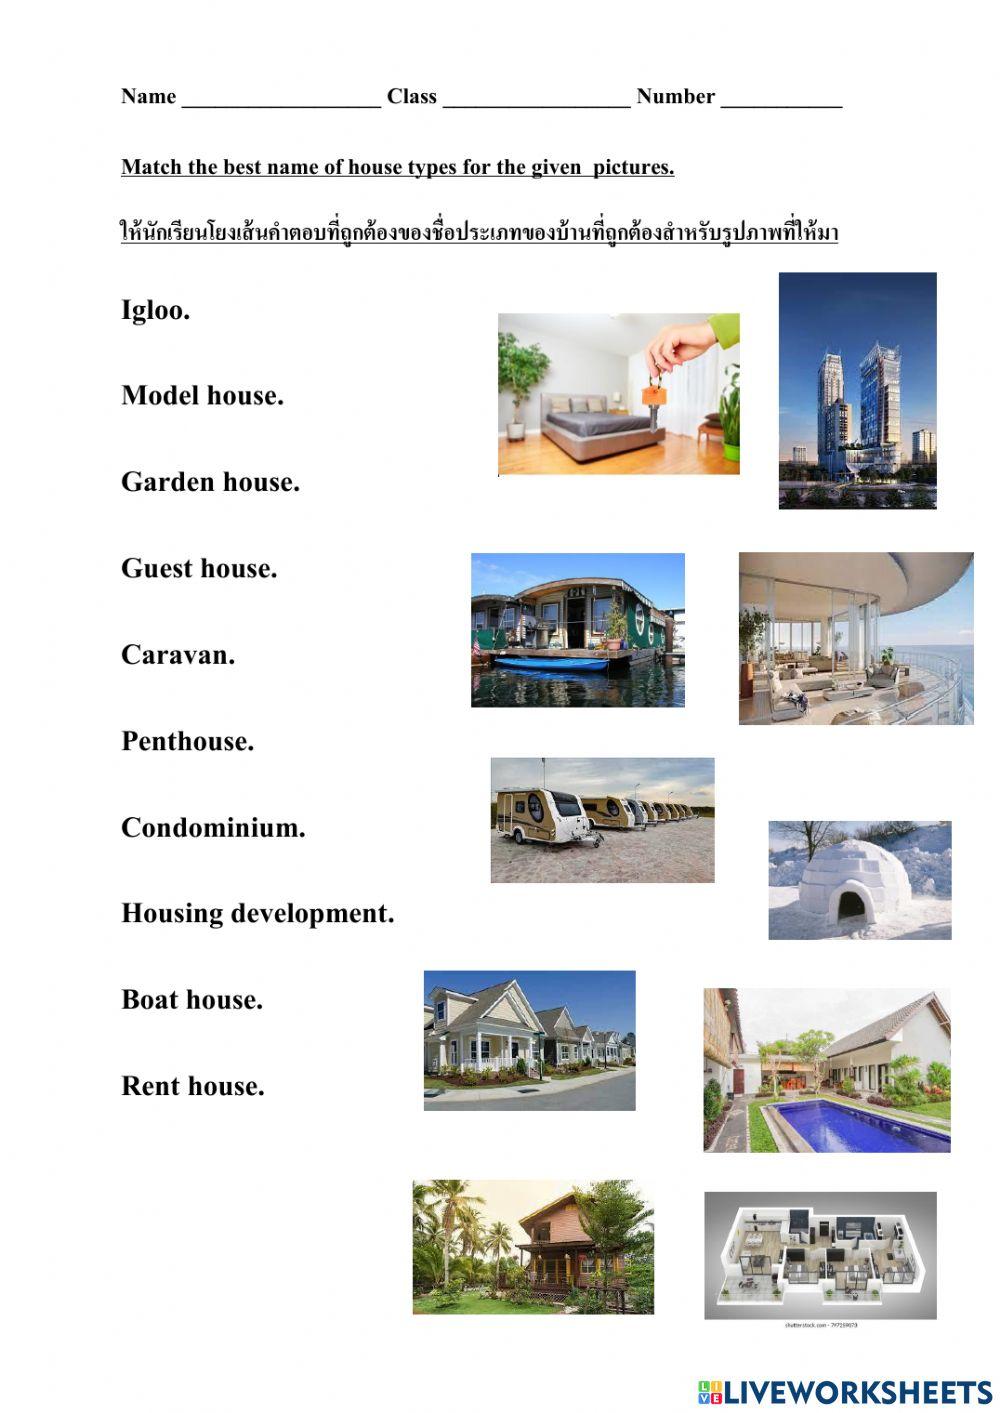 Types of Houses Test 1